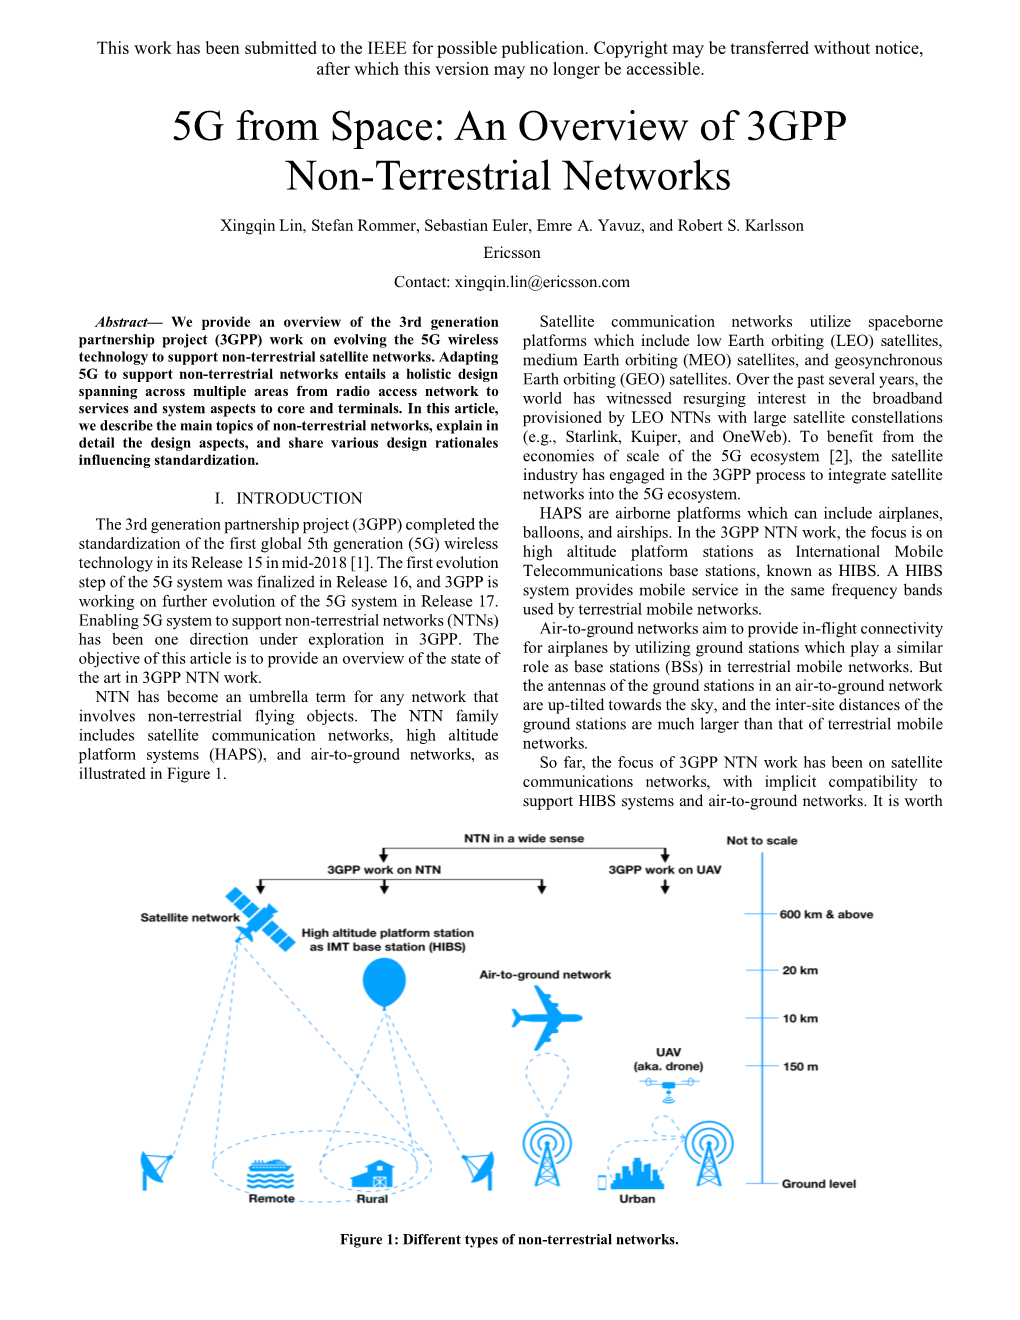 5G from Space: an Overview of 3GPP Non-Terrestrial Networks